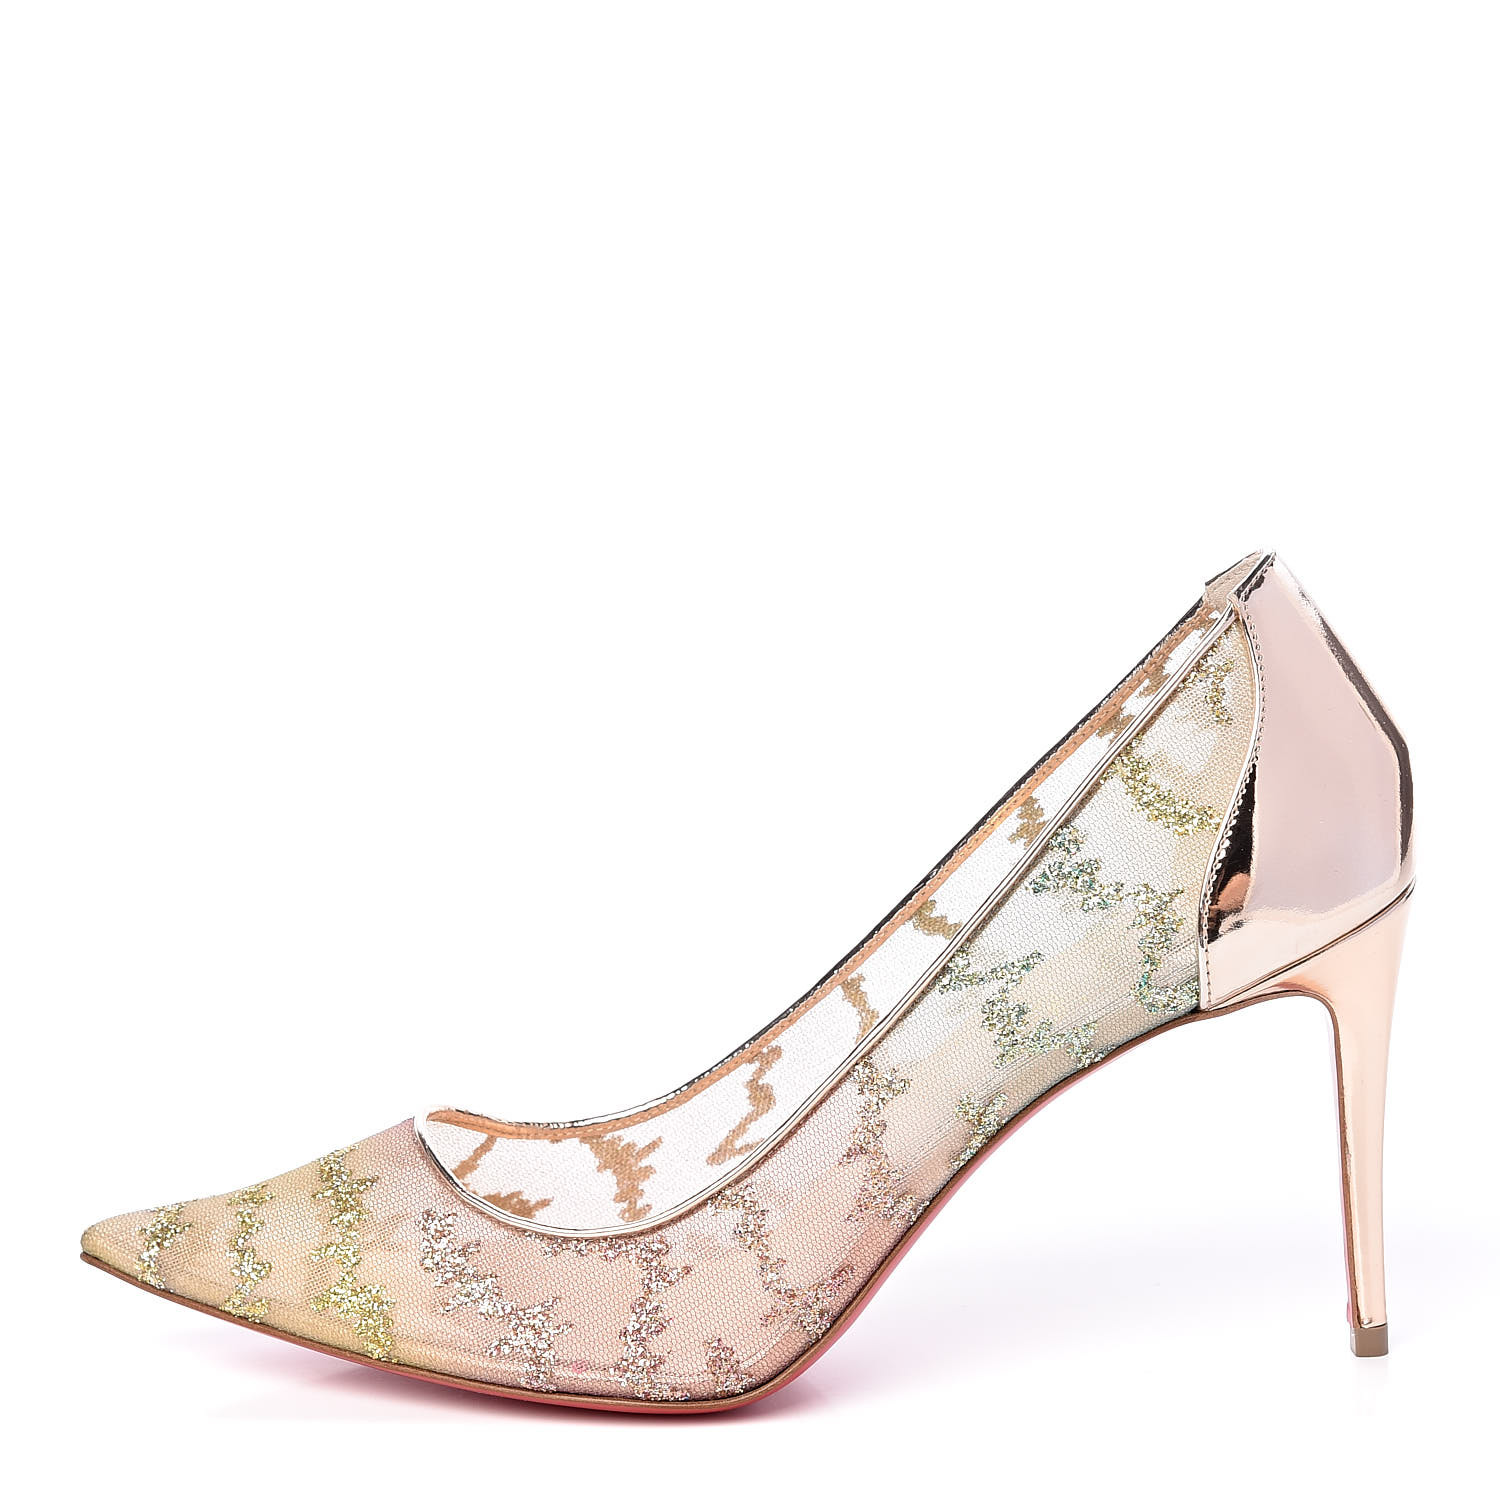 Christian Louboutin Lace 554 Outlet, 50% OFF | lagence.tv